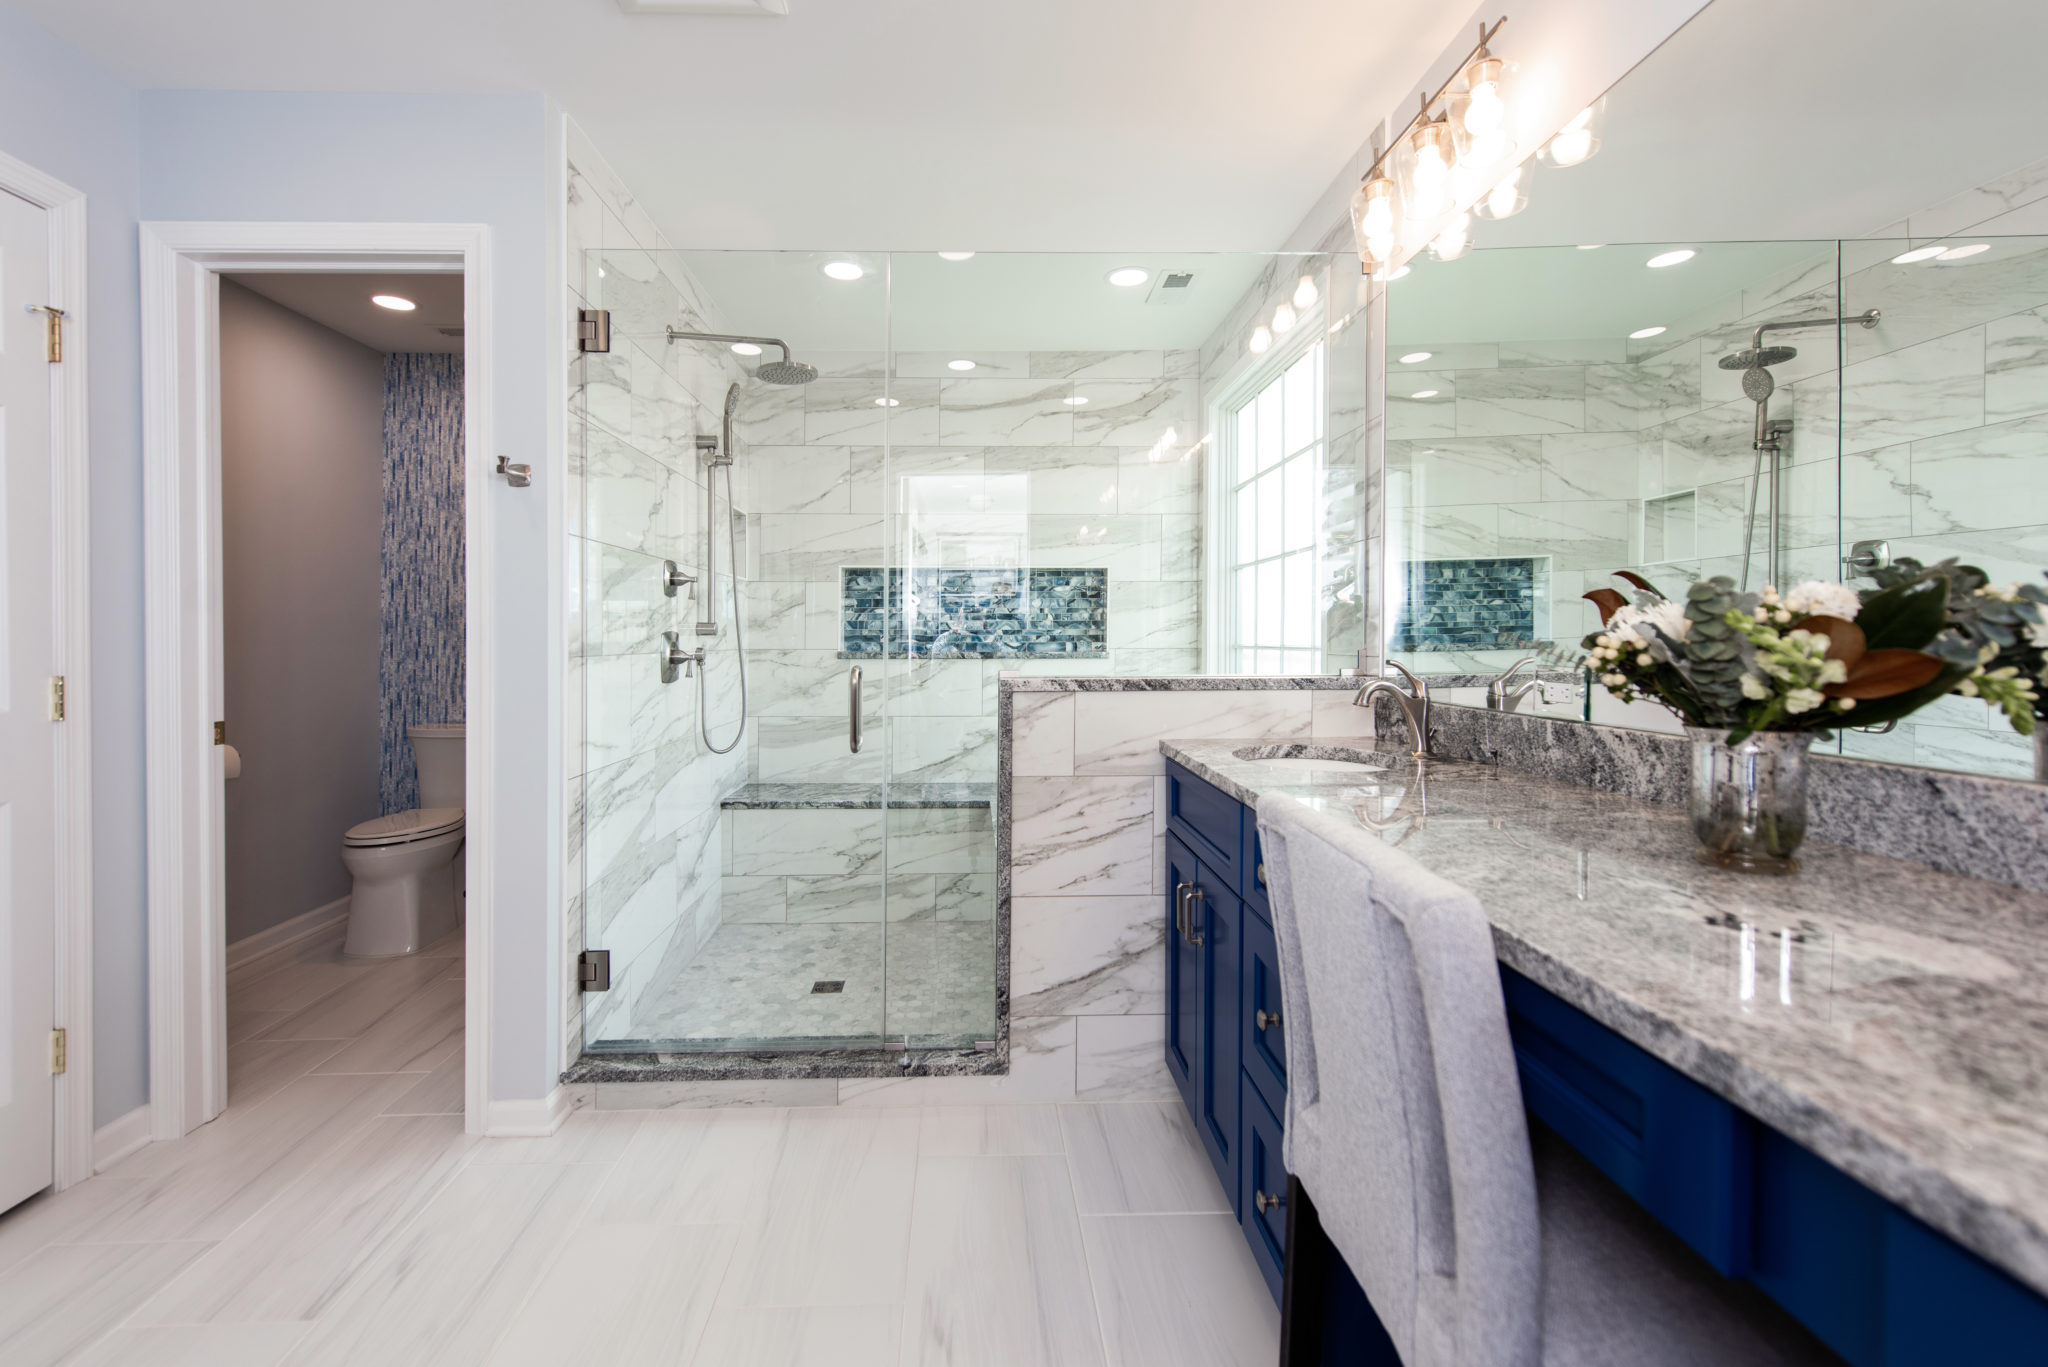 Renovated bathroom with blue cabinets and large shower from Amiano and son